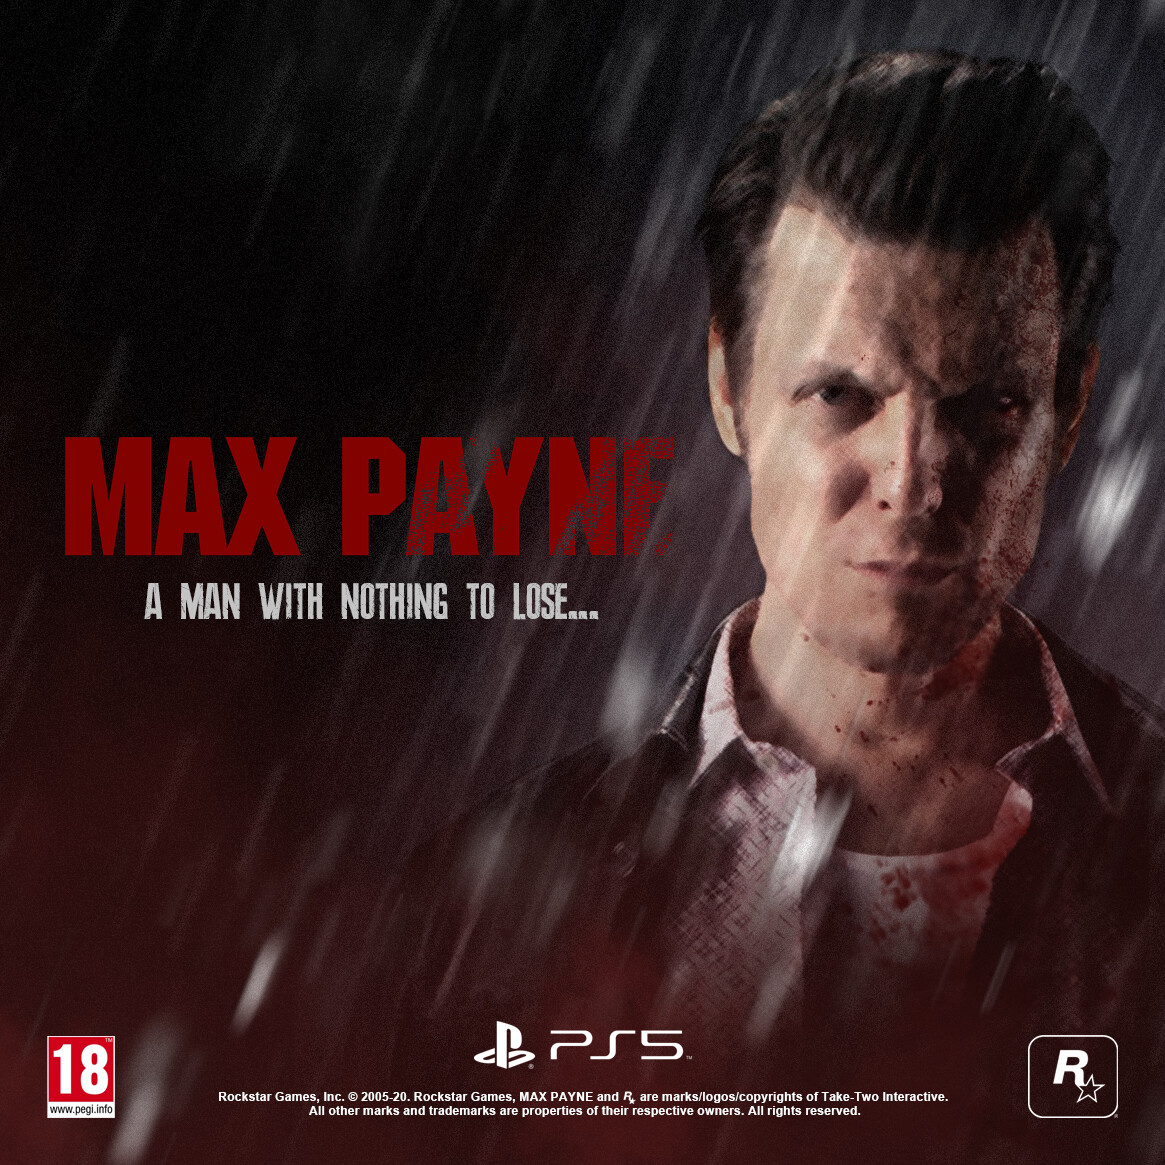 Stream Max Payne Remake Theme - (Cover) by HanMartins